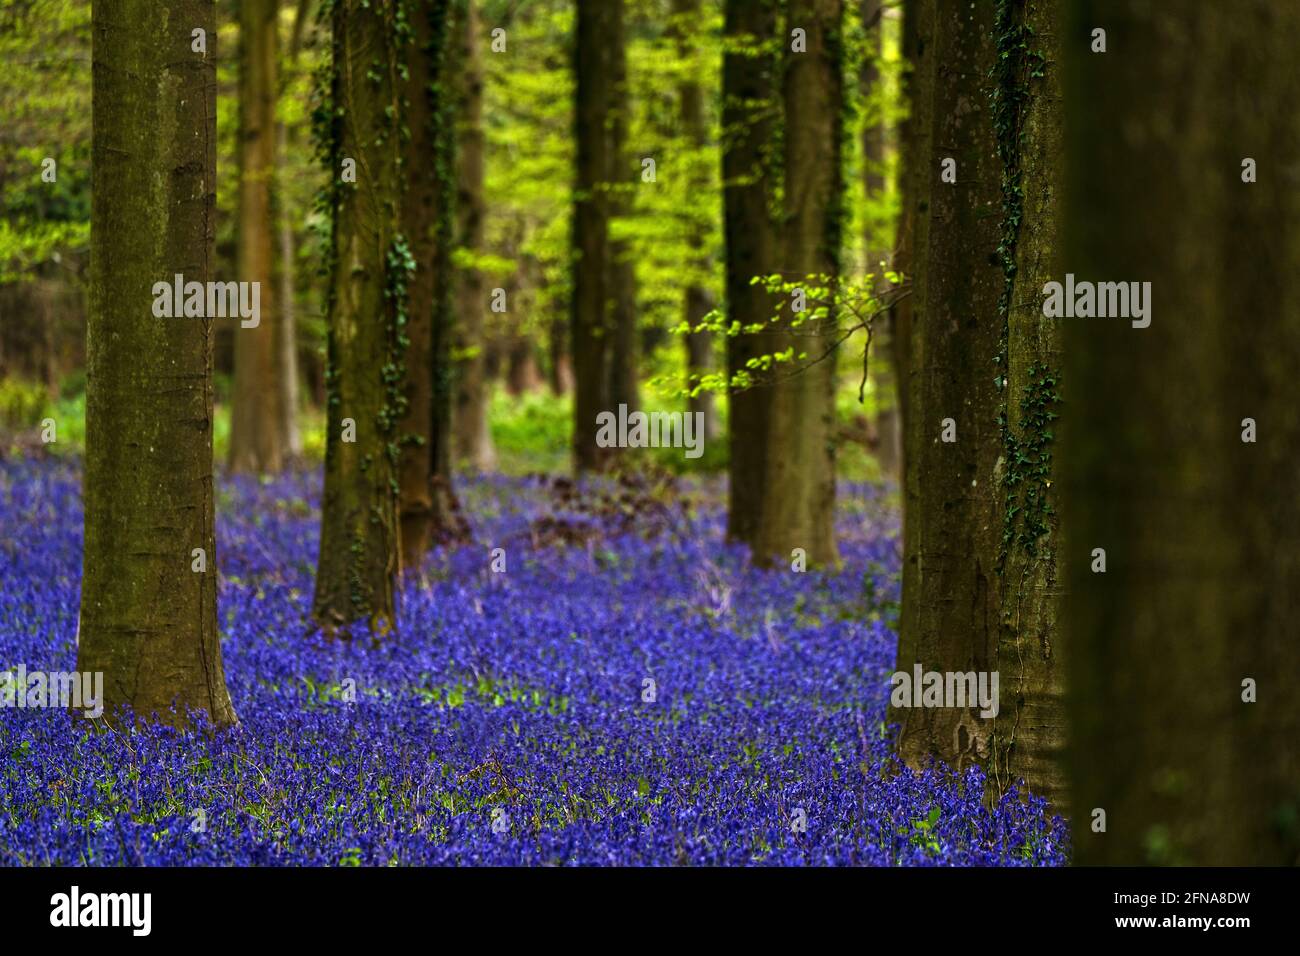 Bluebells in full bloom covering the floor in a carpet of blue in a ...